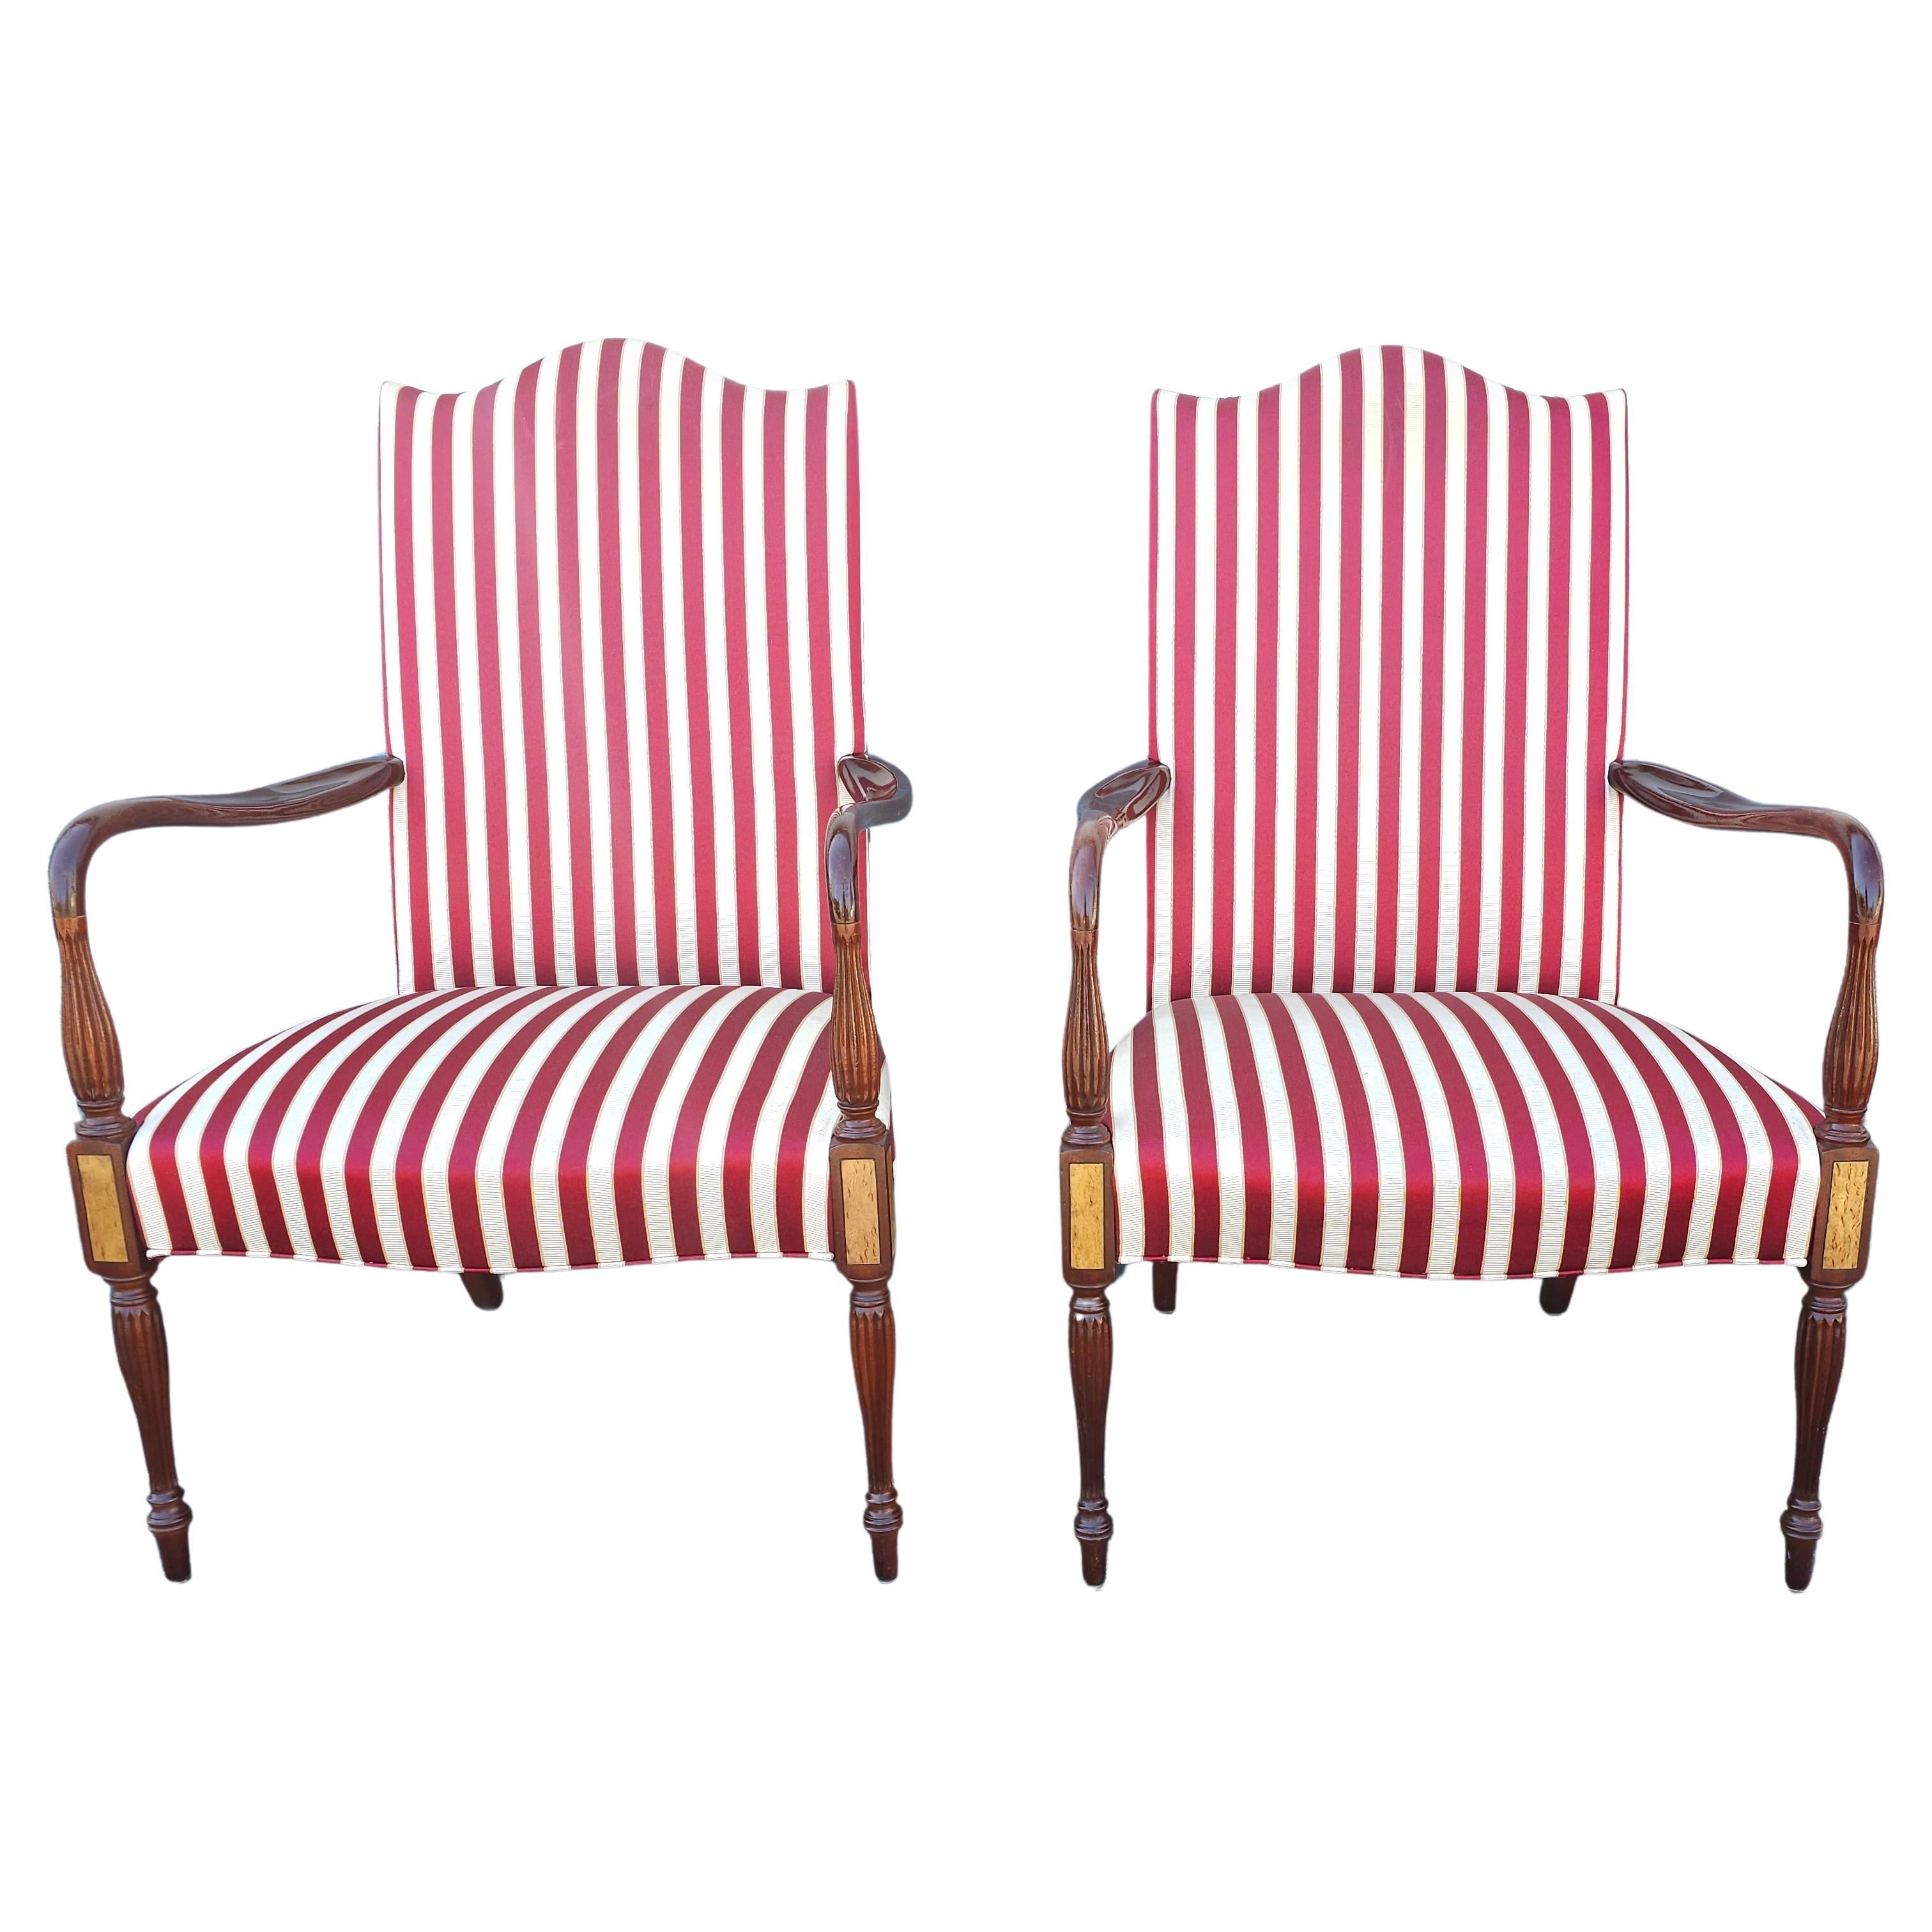 Hickory Chair Martha Washington Mahogany Upholstered Open Arm Chairs, Pair For Sale